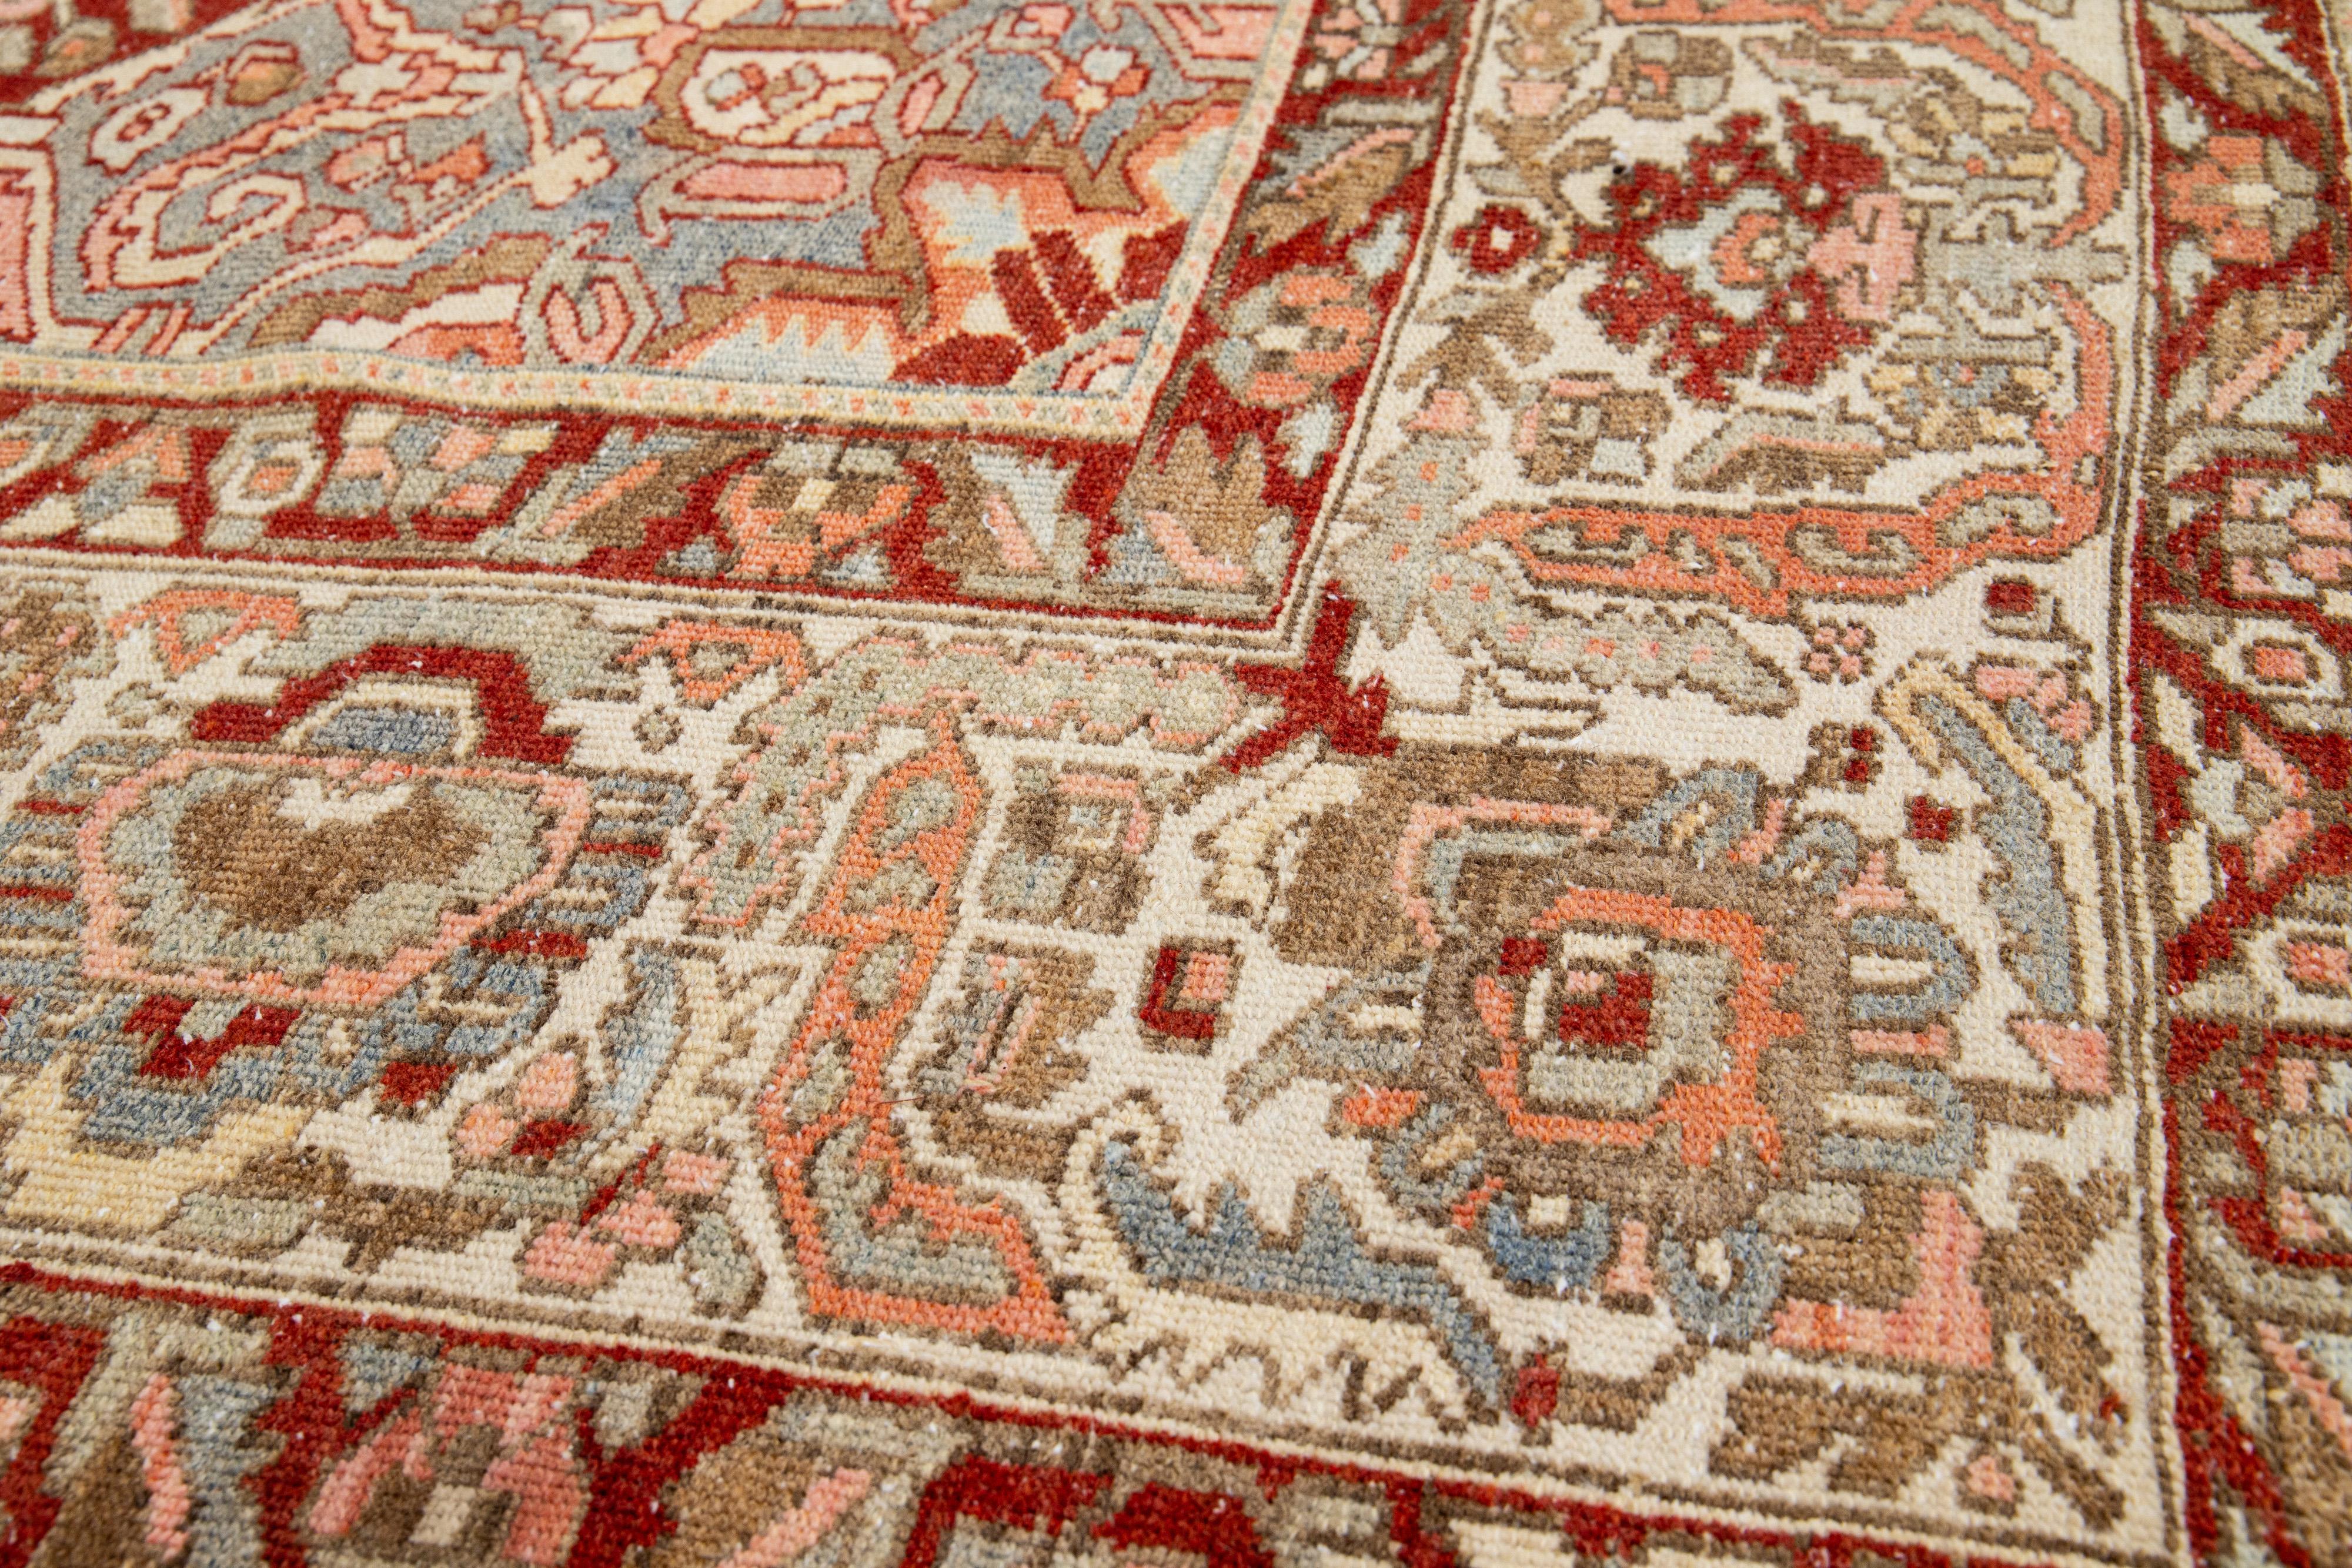 Islamic 1920s Persian Bakhtiari Wool Rug Handknotted With A Multicolor Rosette Motif For Sale